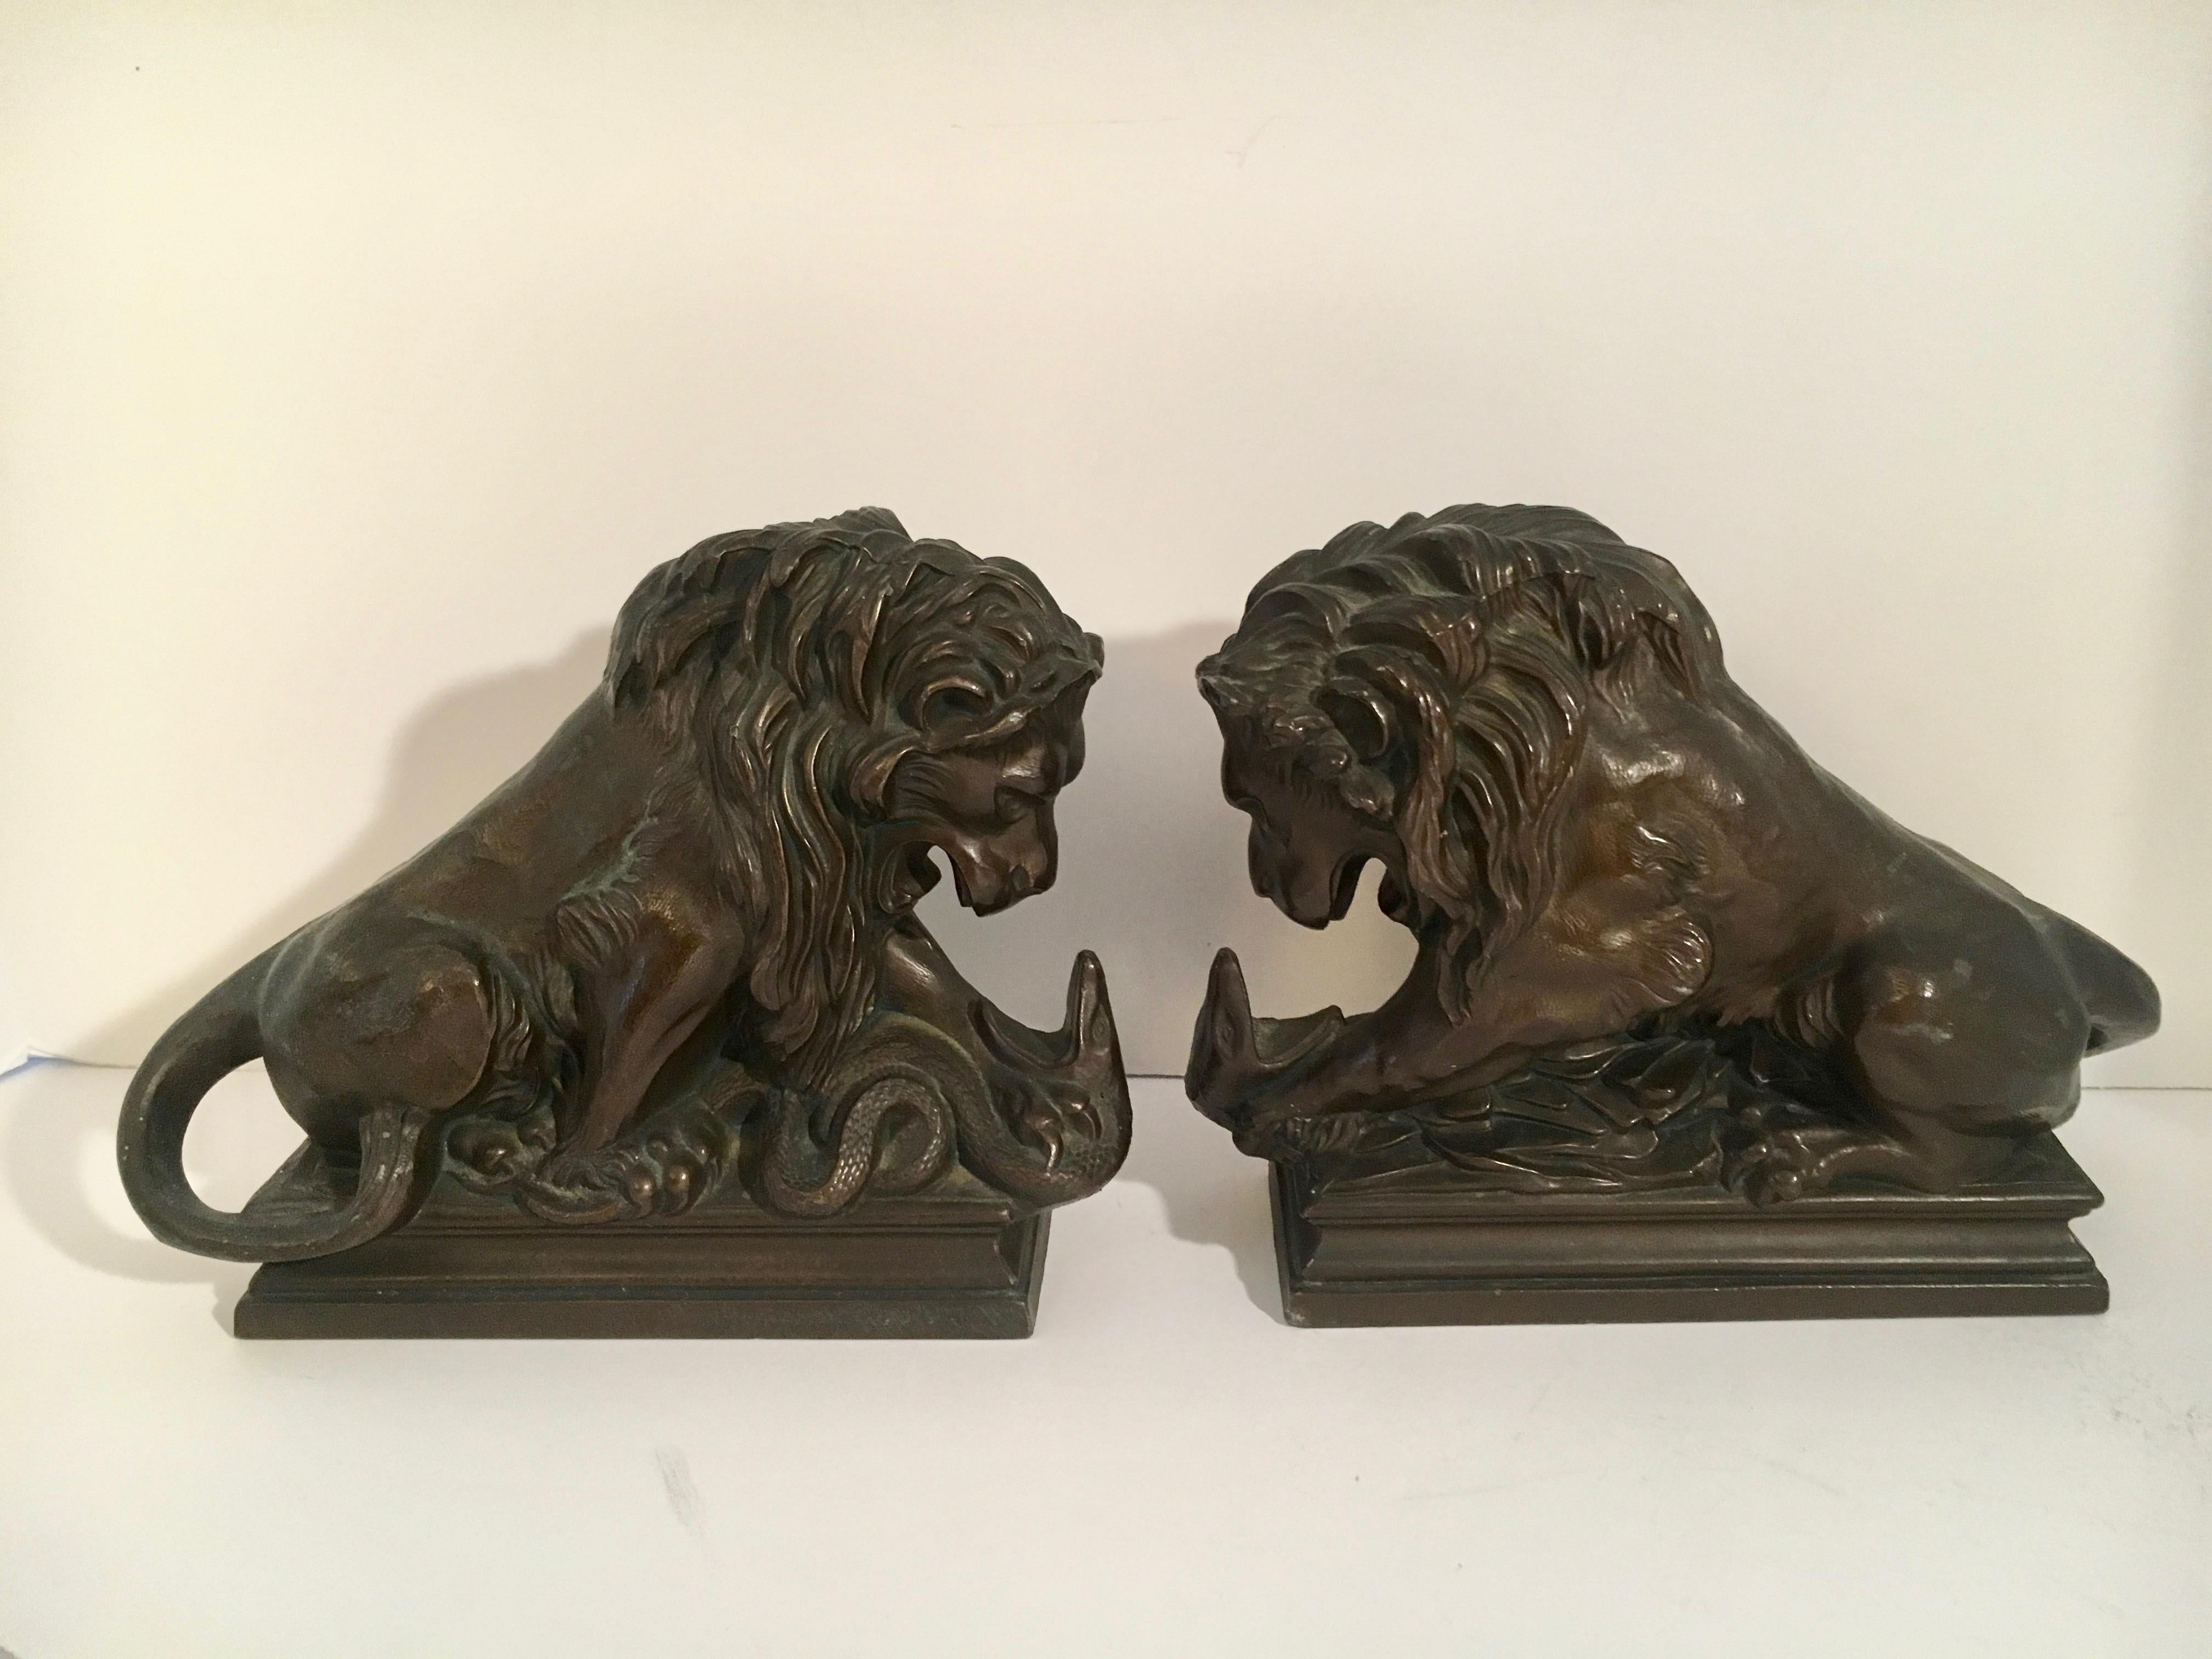 Pair of bronze over metal lions wrestling with serpent - a handsome pair suitable for any office or shelf. A beautifully graceful stance.